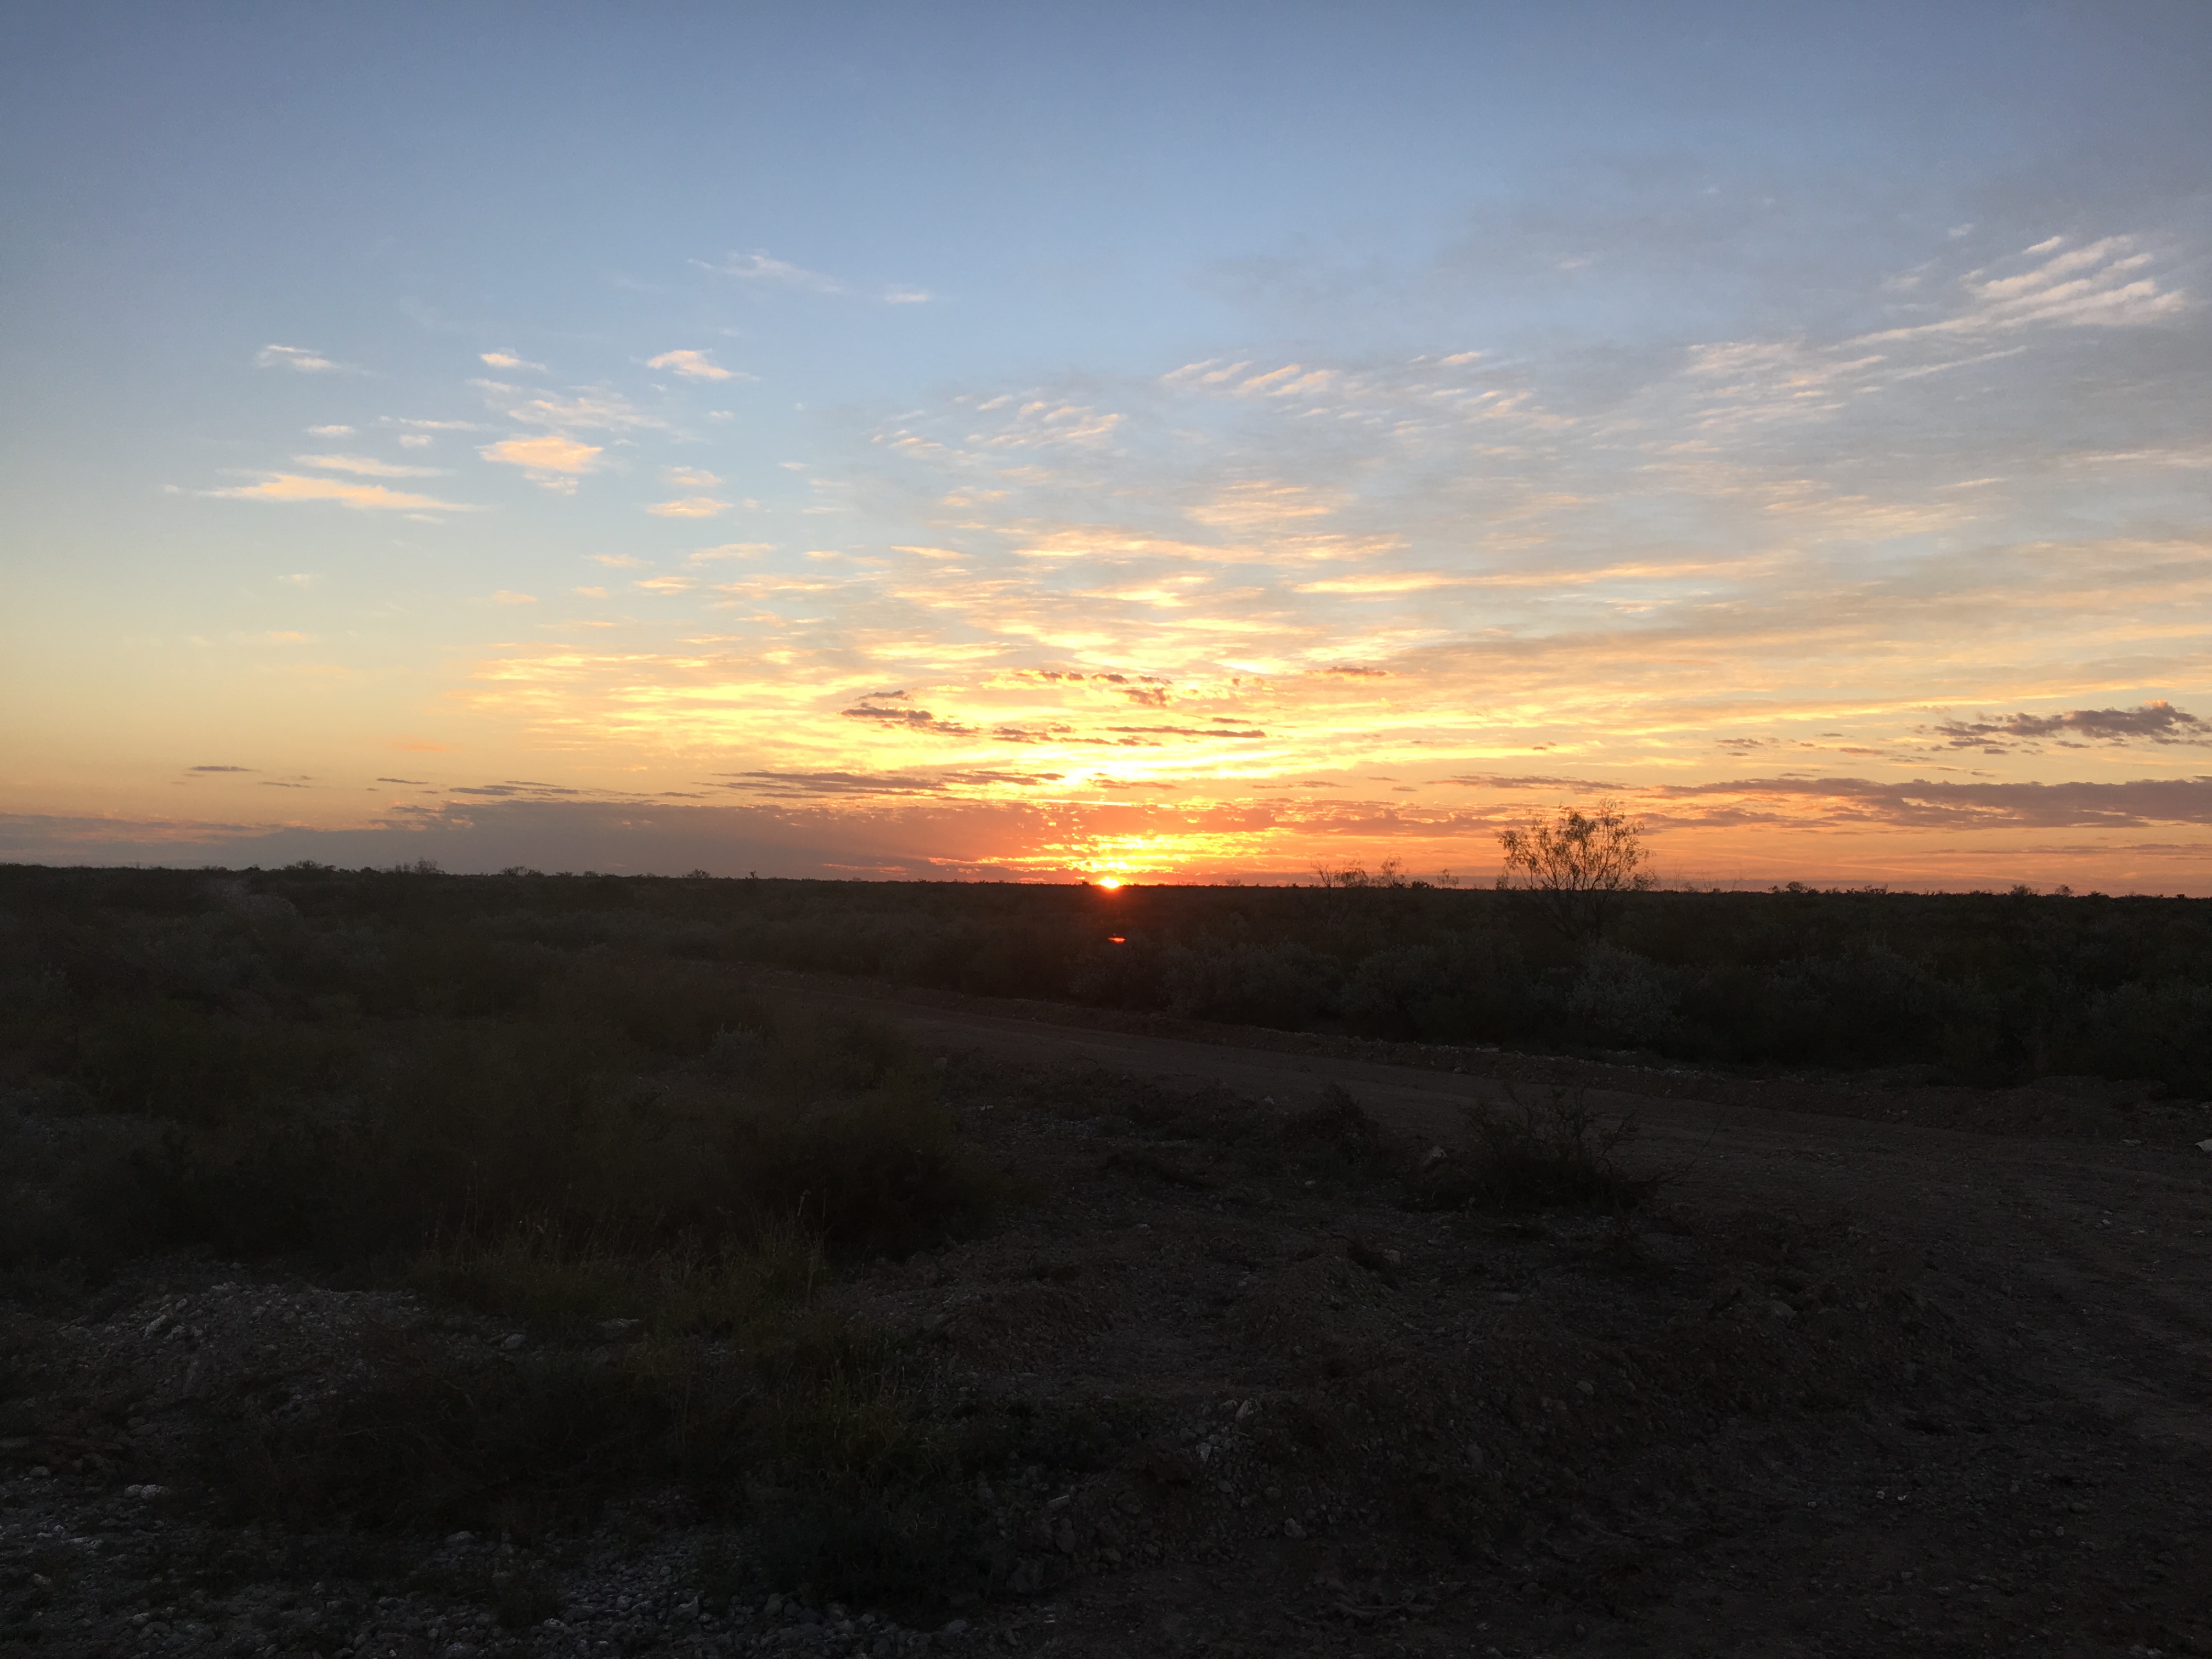 Hunting in Mexico offers big deer, lots of birds, and glorious sunrises ...